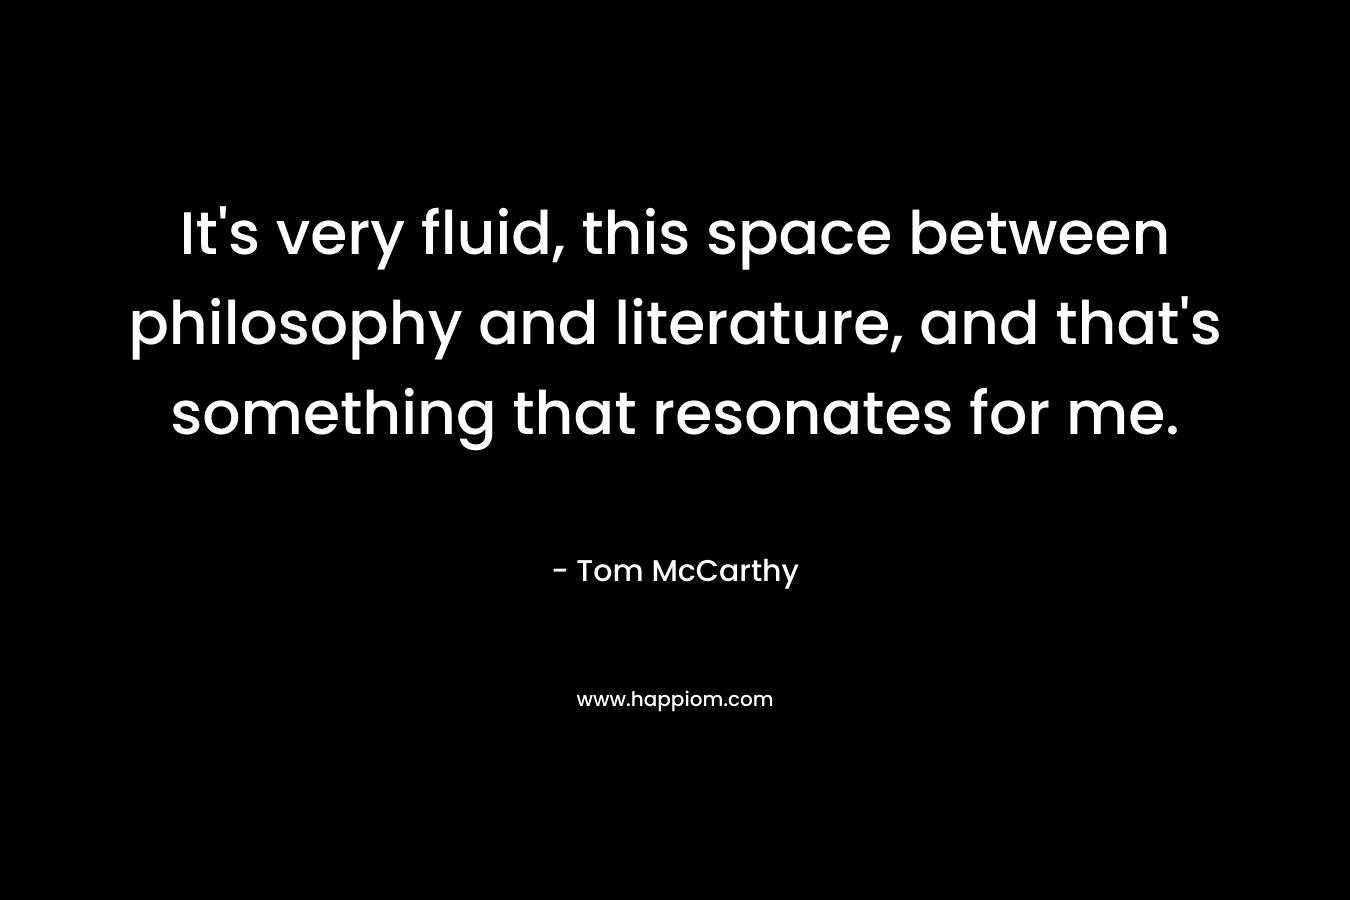 It’s very fluid, this space between philosophy and literature, and that’s something that resonates for me. – Tom McCarthy